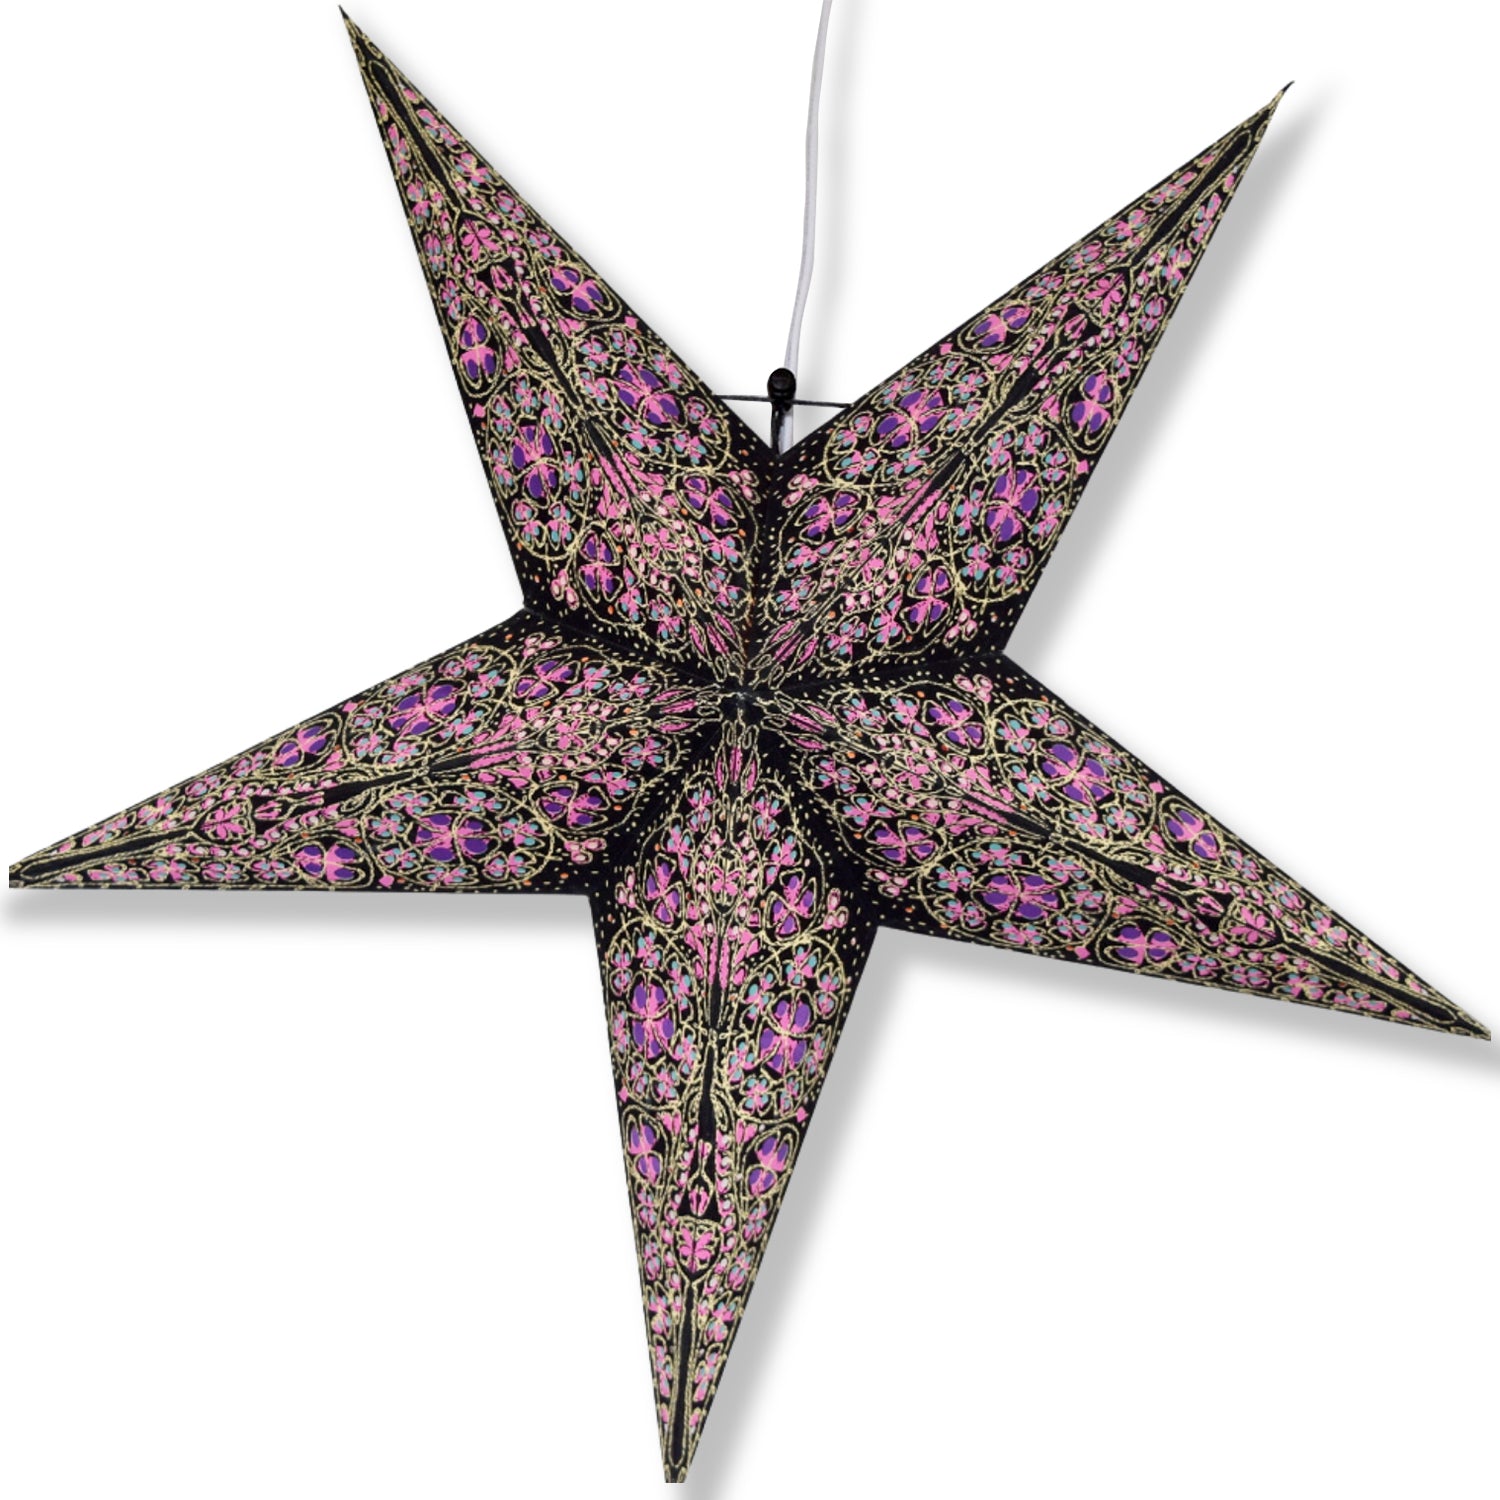 3-PACK + Cord | 24" Purple Garden Paper Star Lantern and Lamp Cord Hanging Decoration